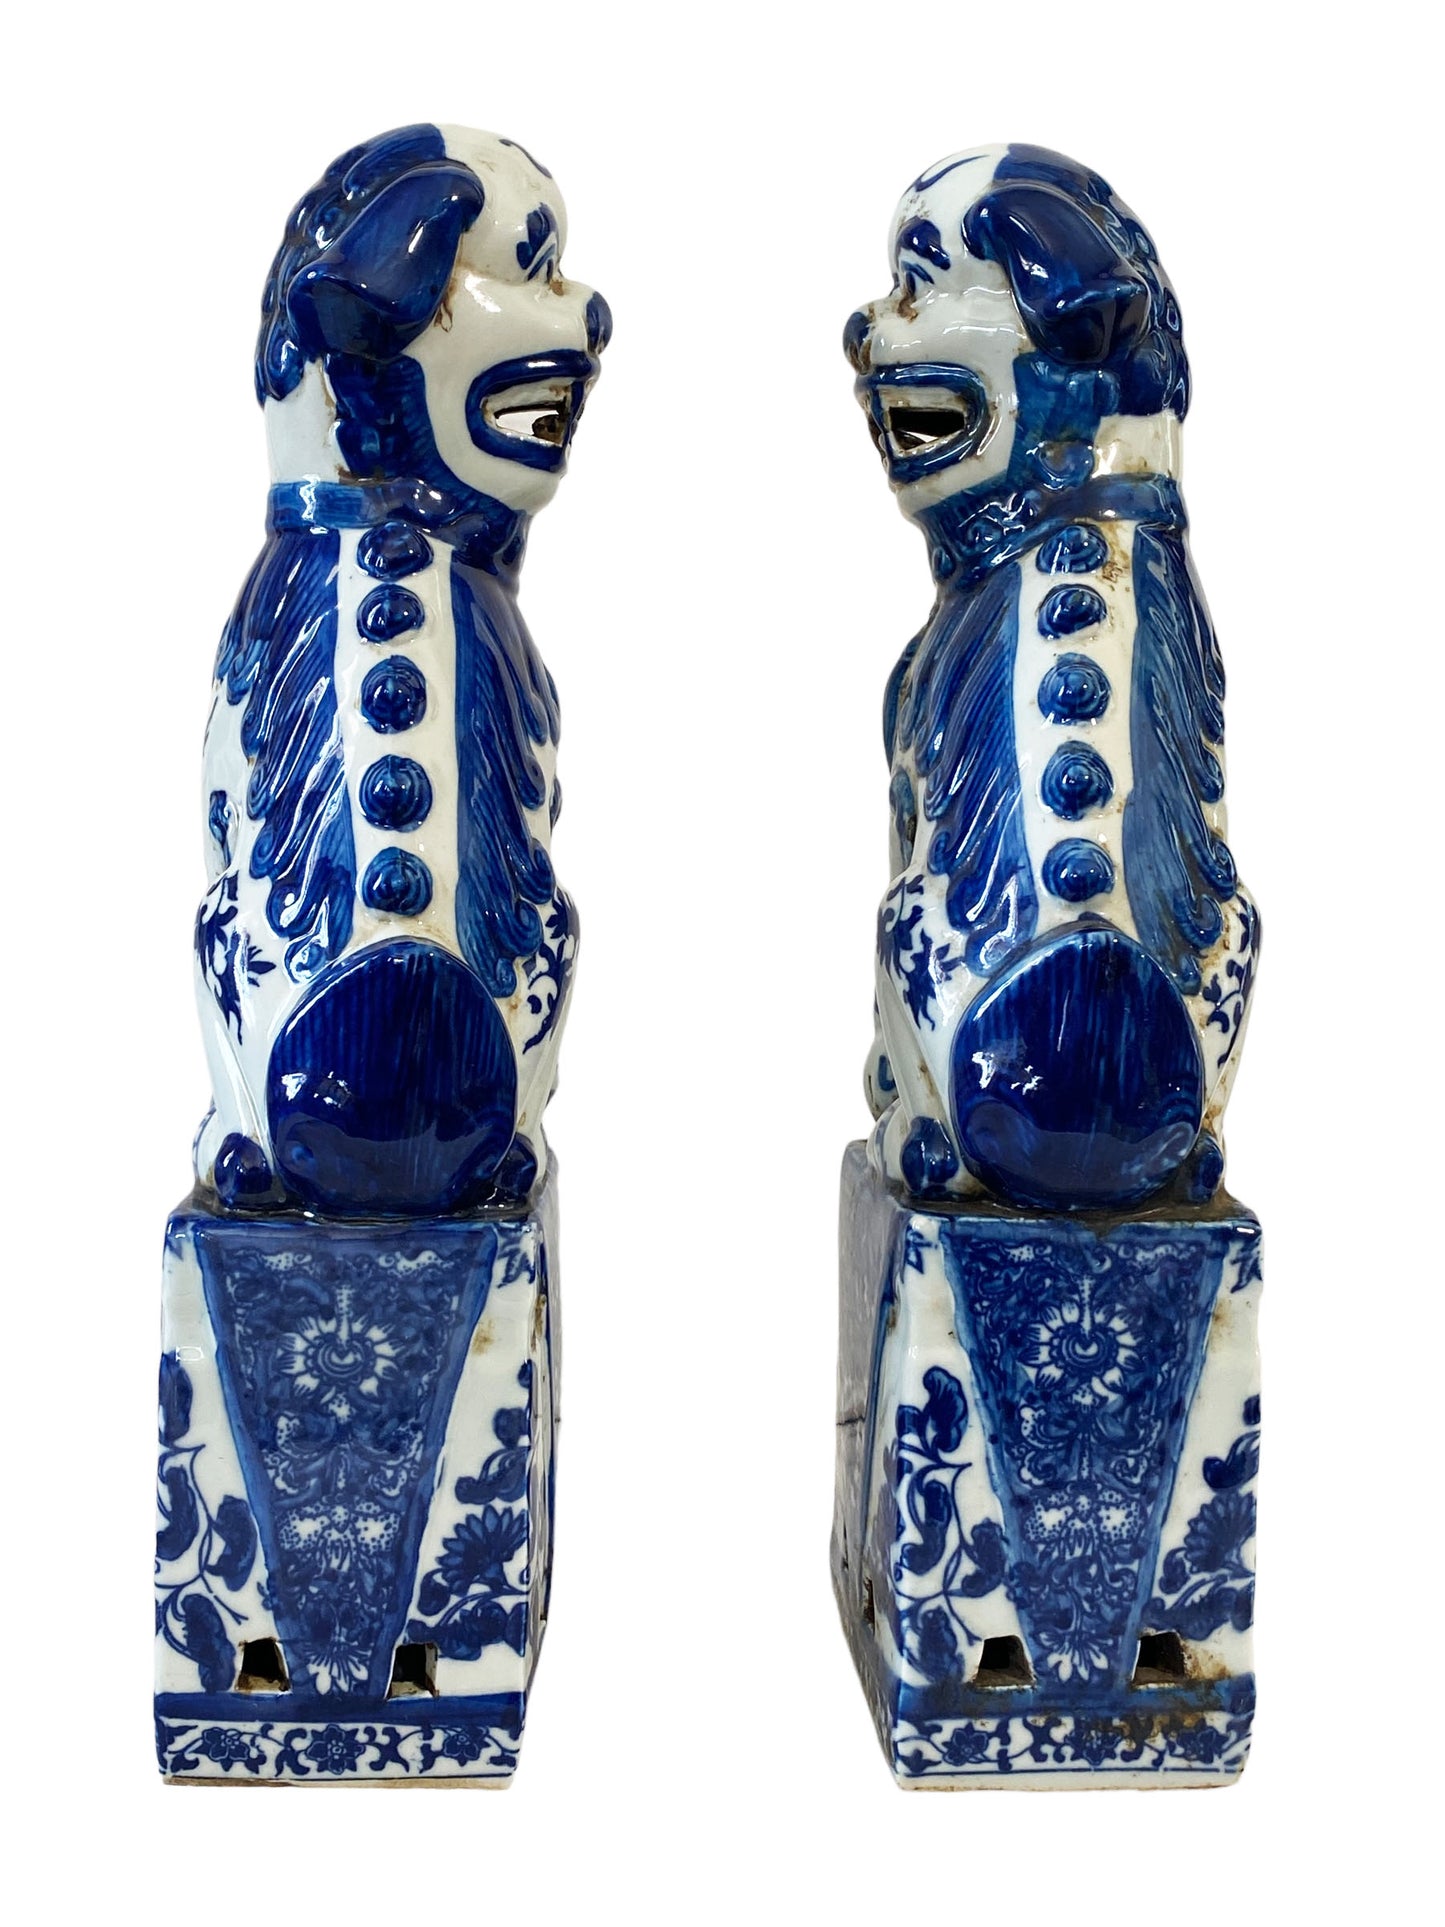 #5593 Chinoiserie Blue and White Foo Dogs - a Pair 13.25 " H